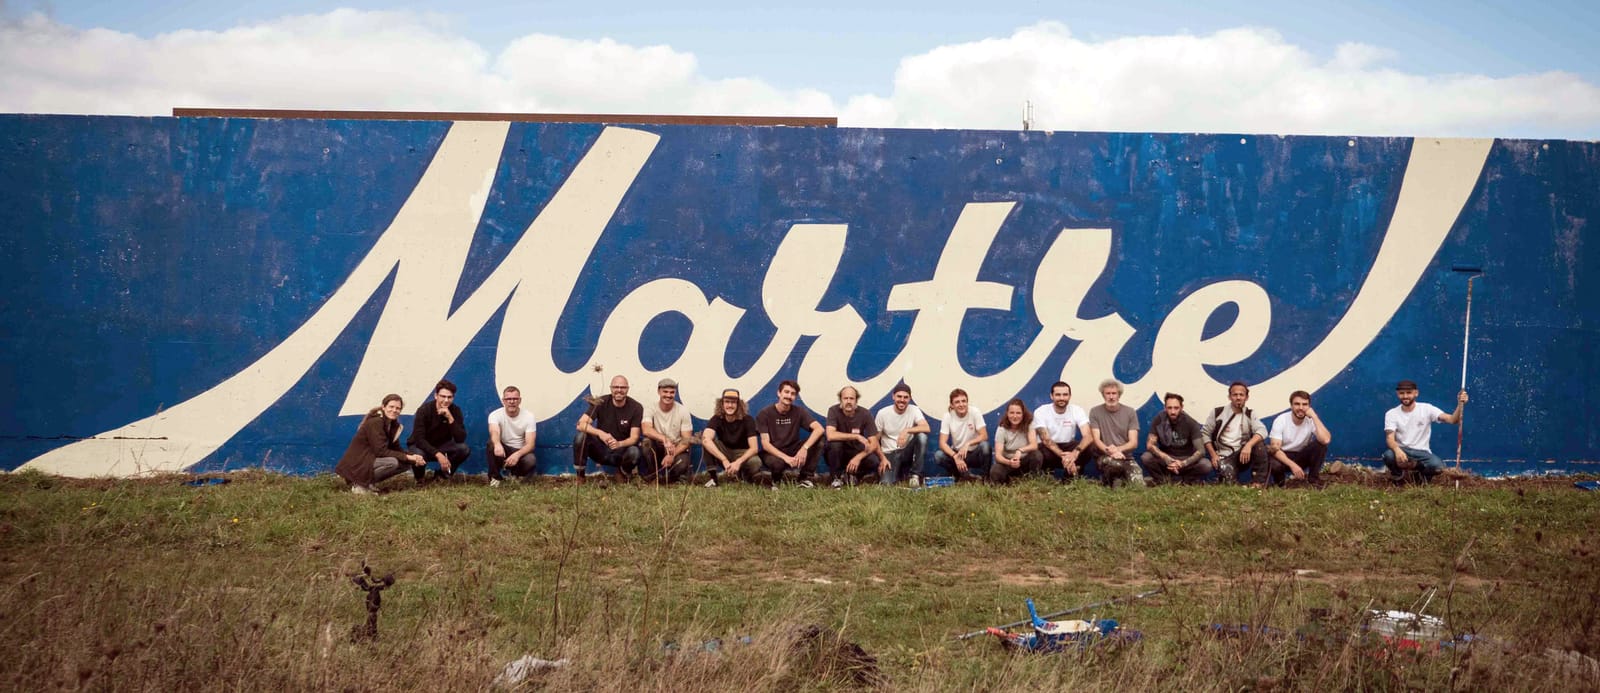 Group of people squatting in front of a large wall that has the word 'Martre' in script lettering produced by cutting in with a dark blue on a white wall.